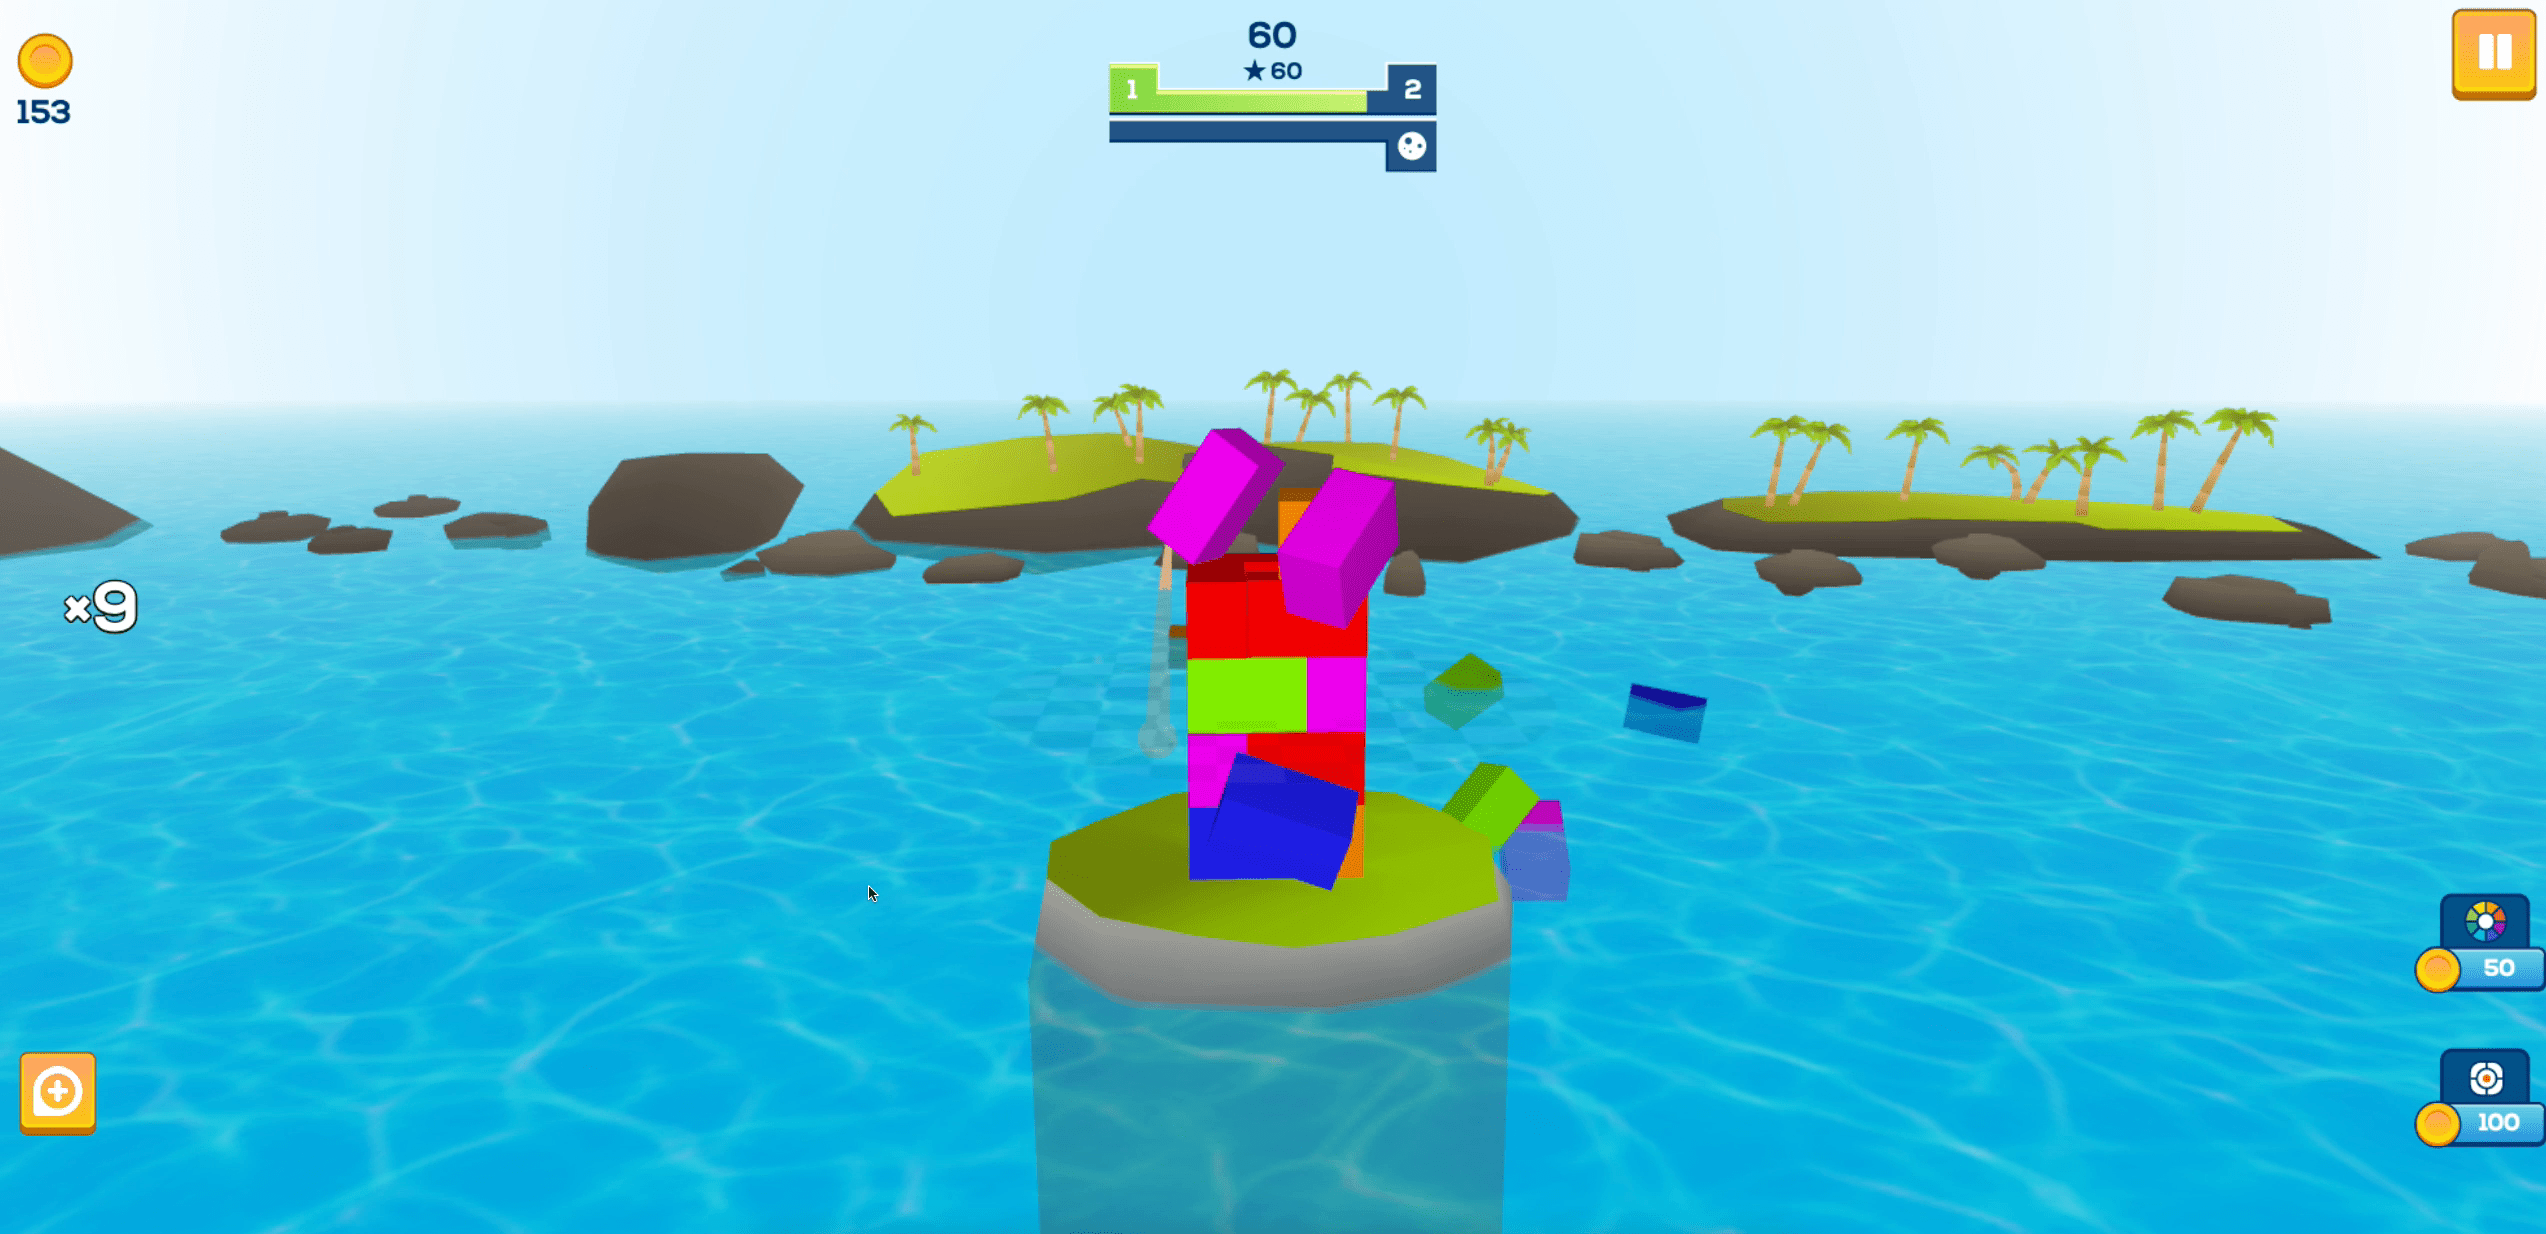 Tower of Colors: Island Edition Screenshot 3